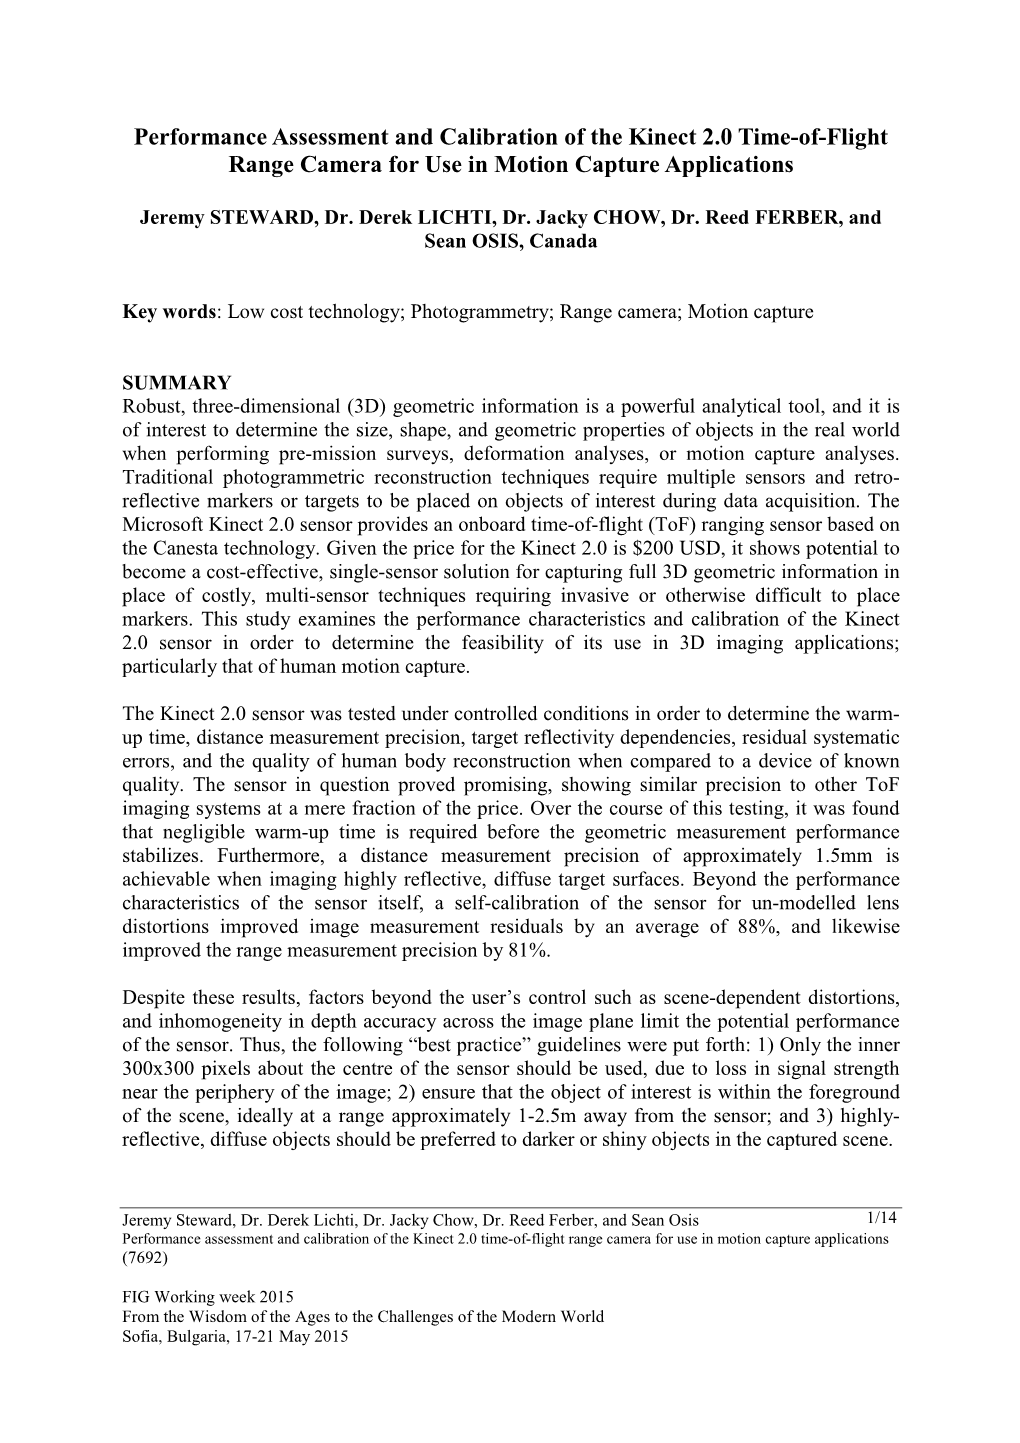 Performance Assessment and Calibration of the Kinect 2.0 Time-Of-Flight Range Camera for Use in Motion Capture Applications